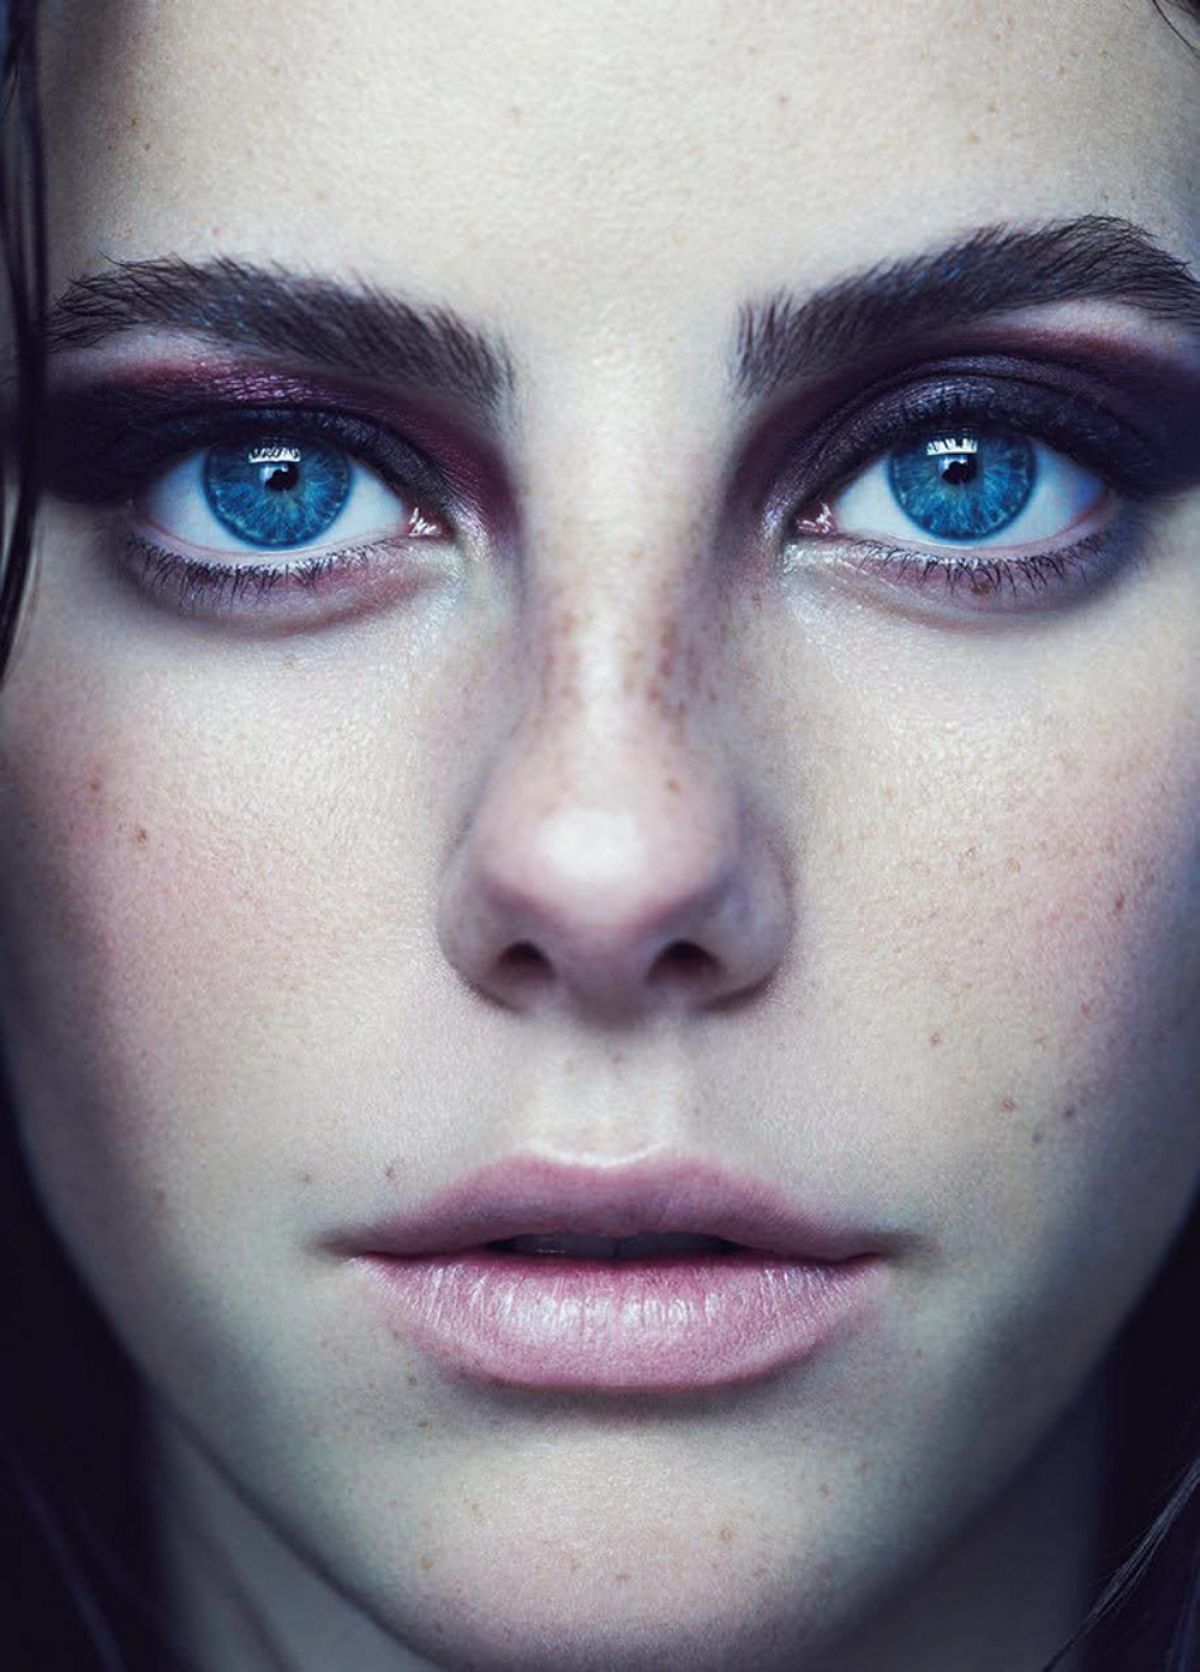 drawings eyes tumblr KAYA in Issue Marie April Claire 2014 SCODELARIO Magazine,